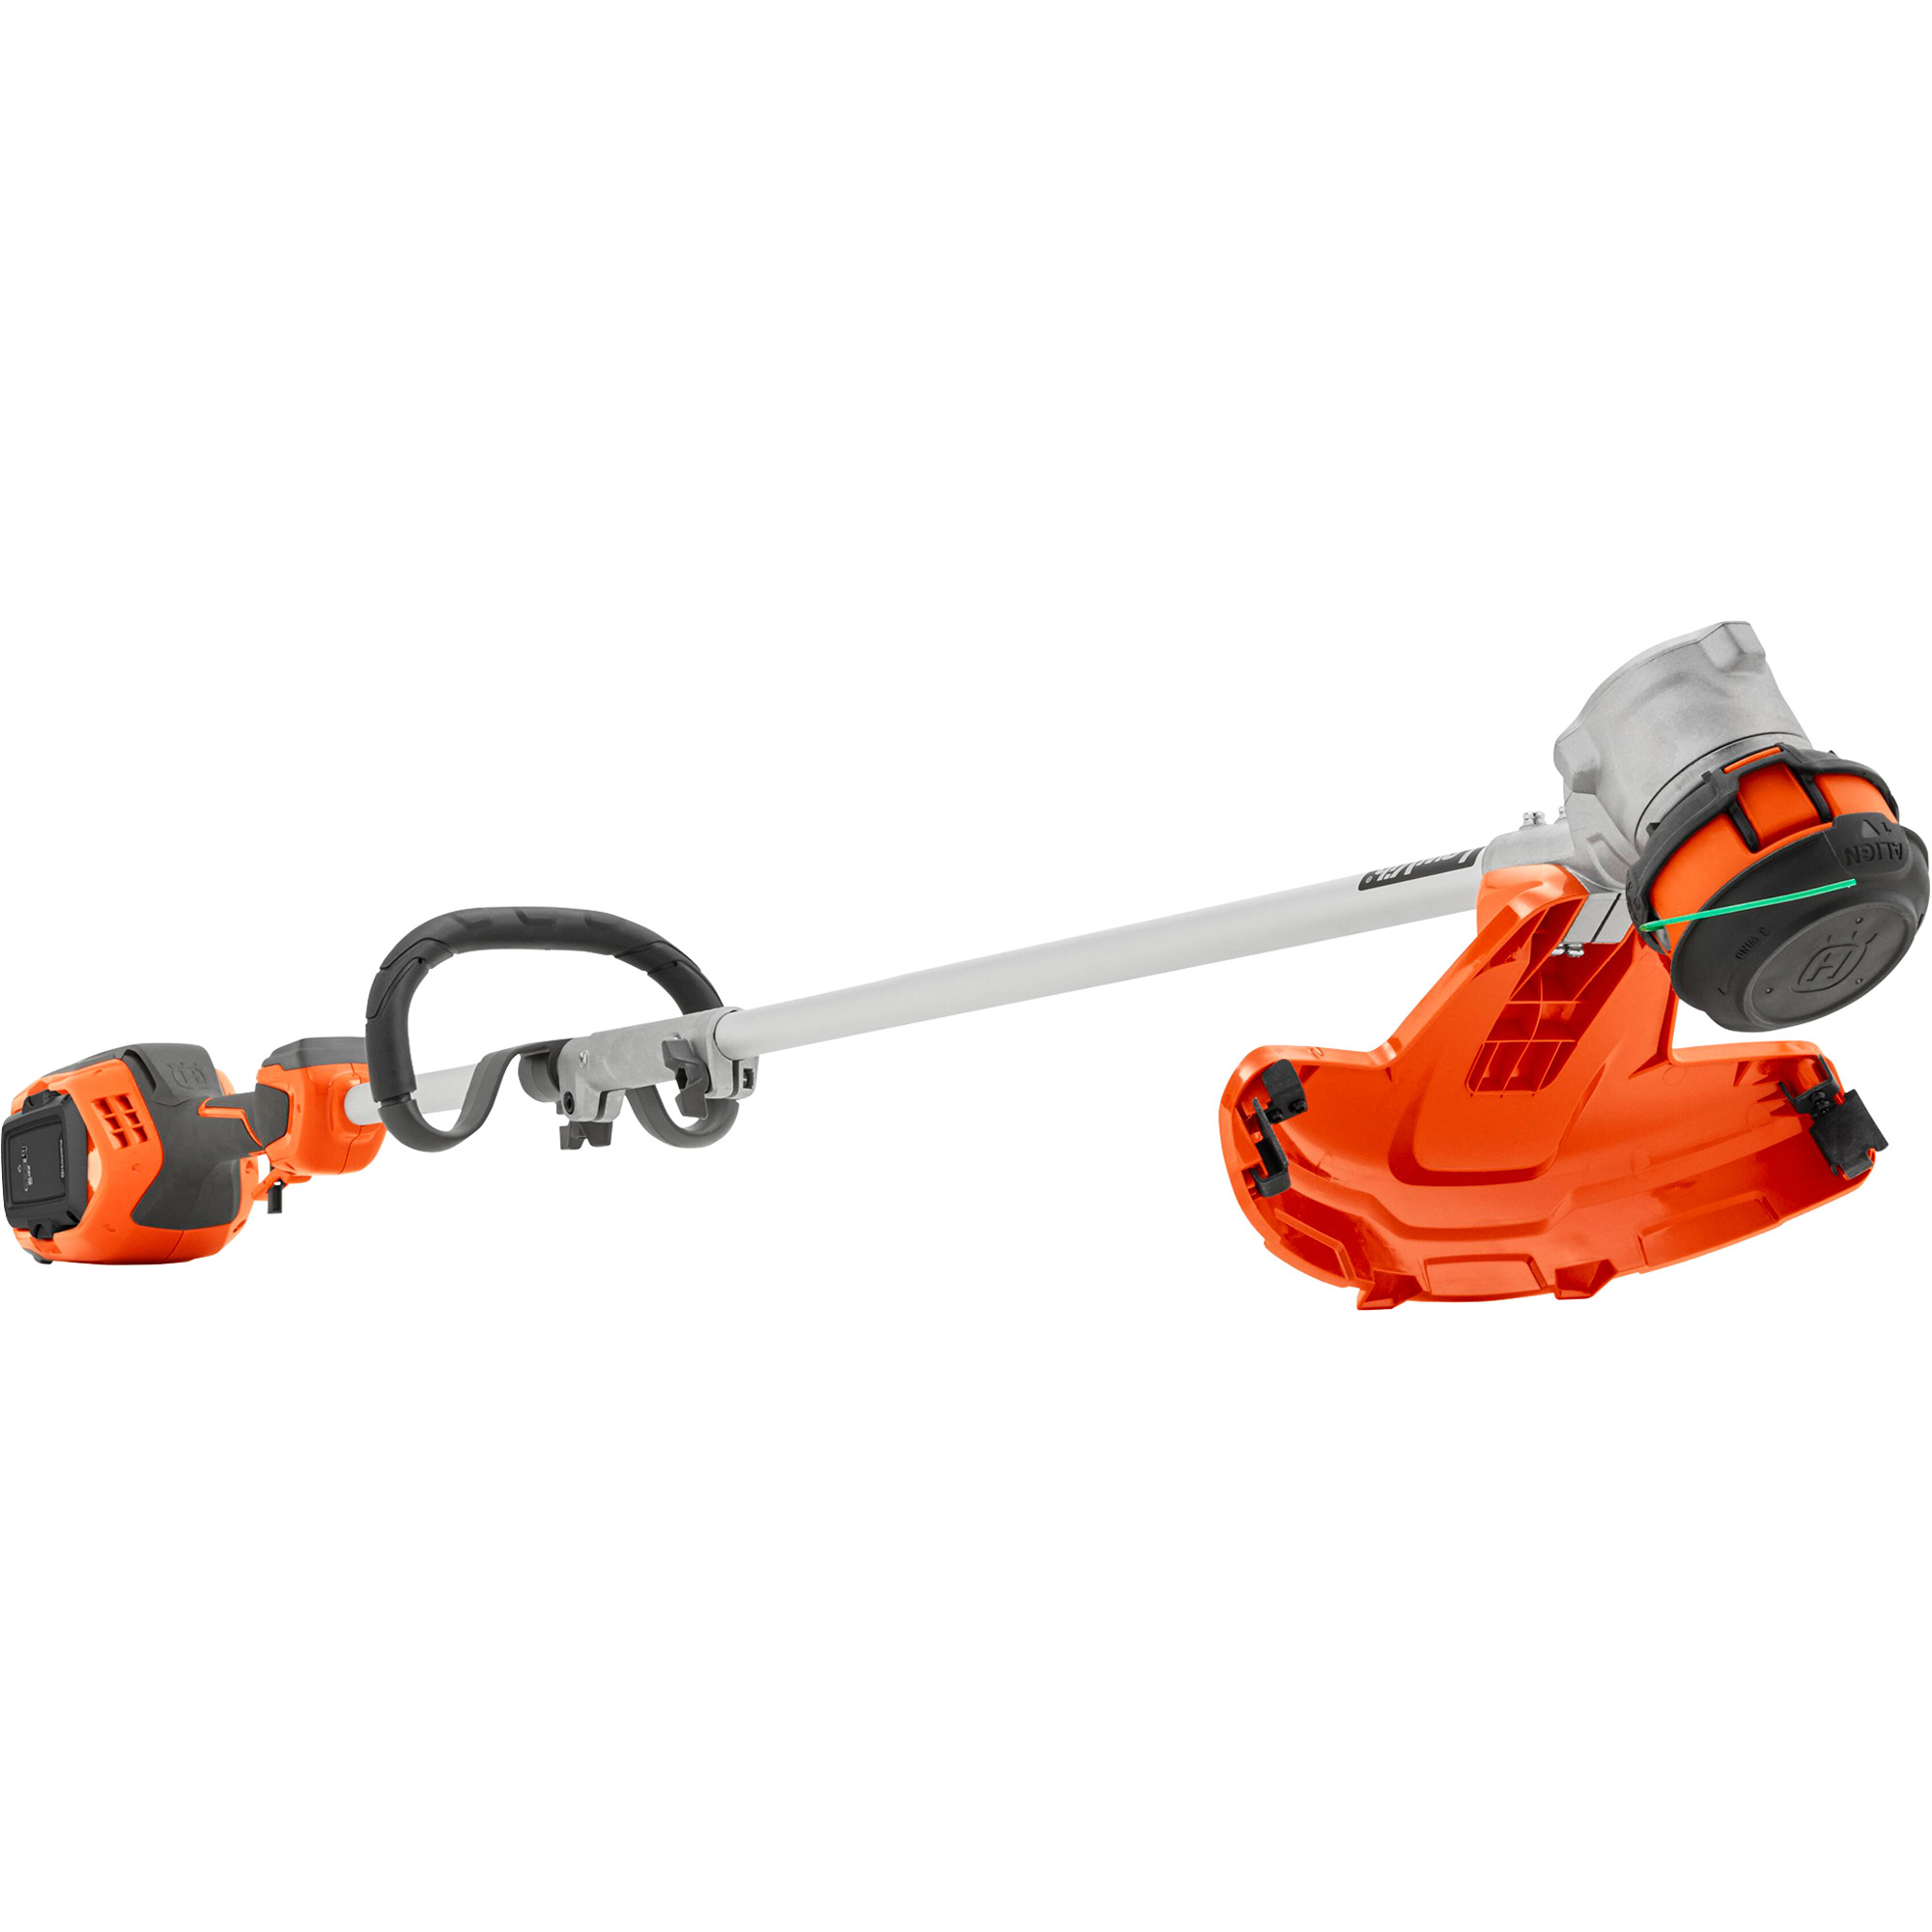 Husqvarna 30iL Weed Eater Cordless String Trimmer, 16Inch Cutting Width, Includes Battery and Charger, Model 320iL